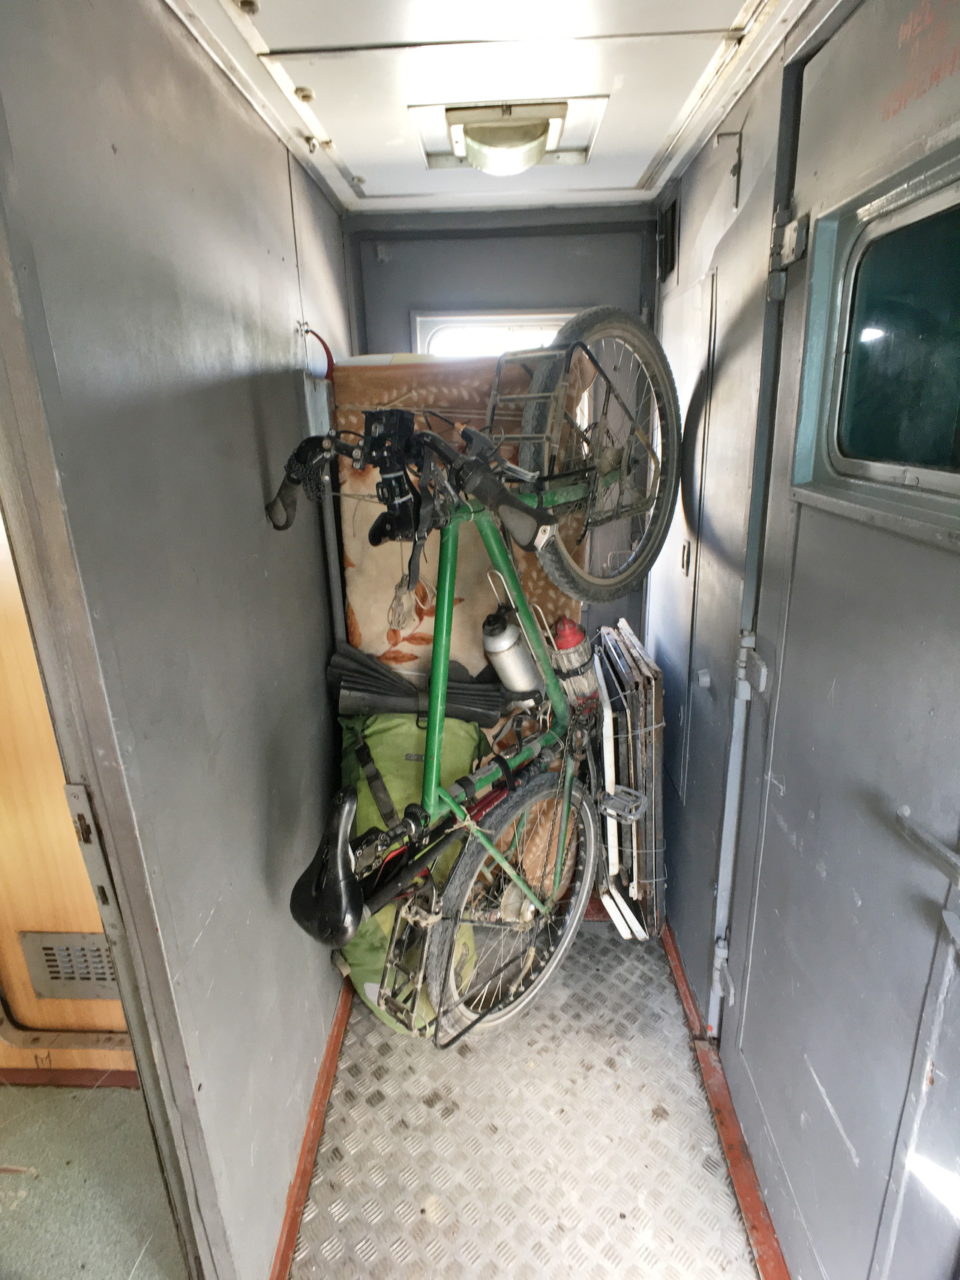 Bicycle and fridge in a train